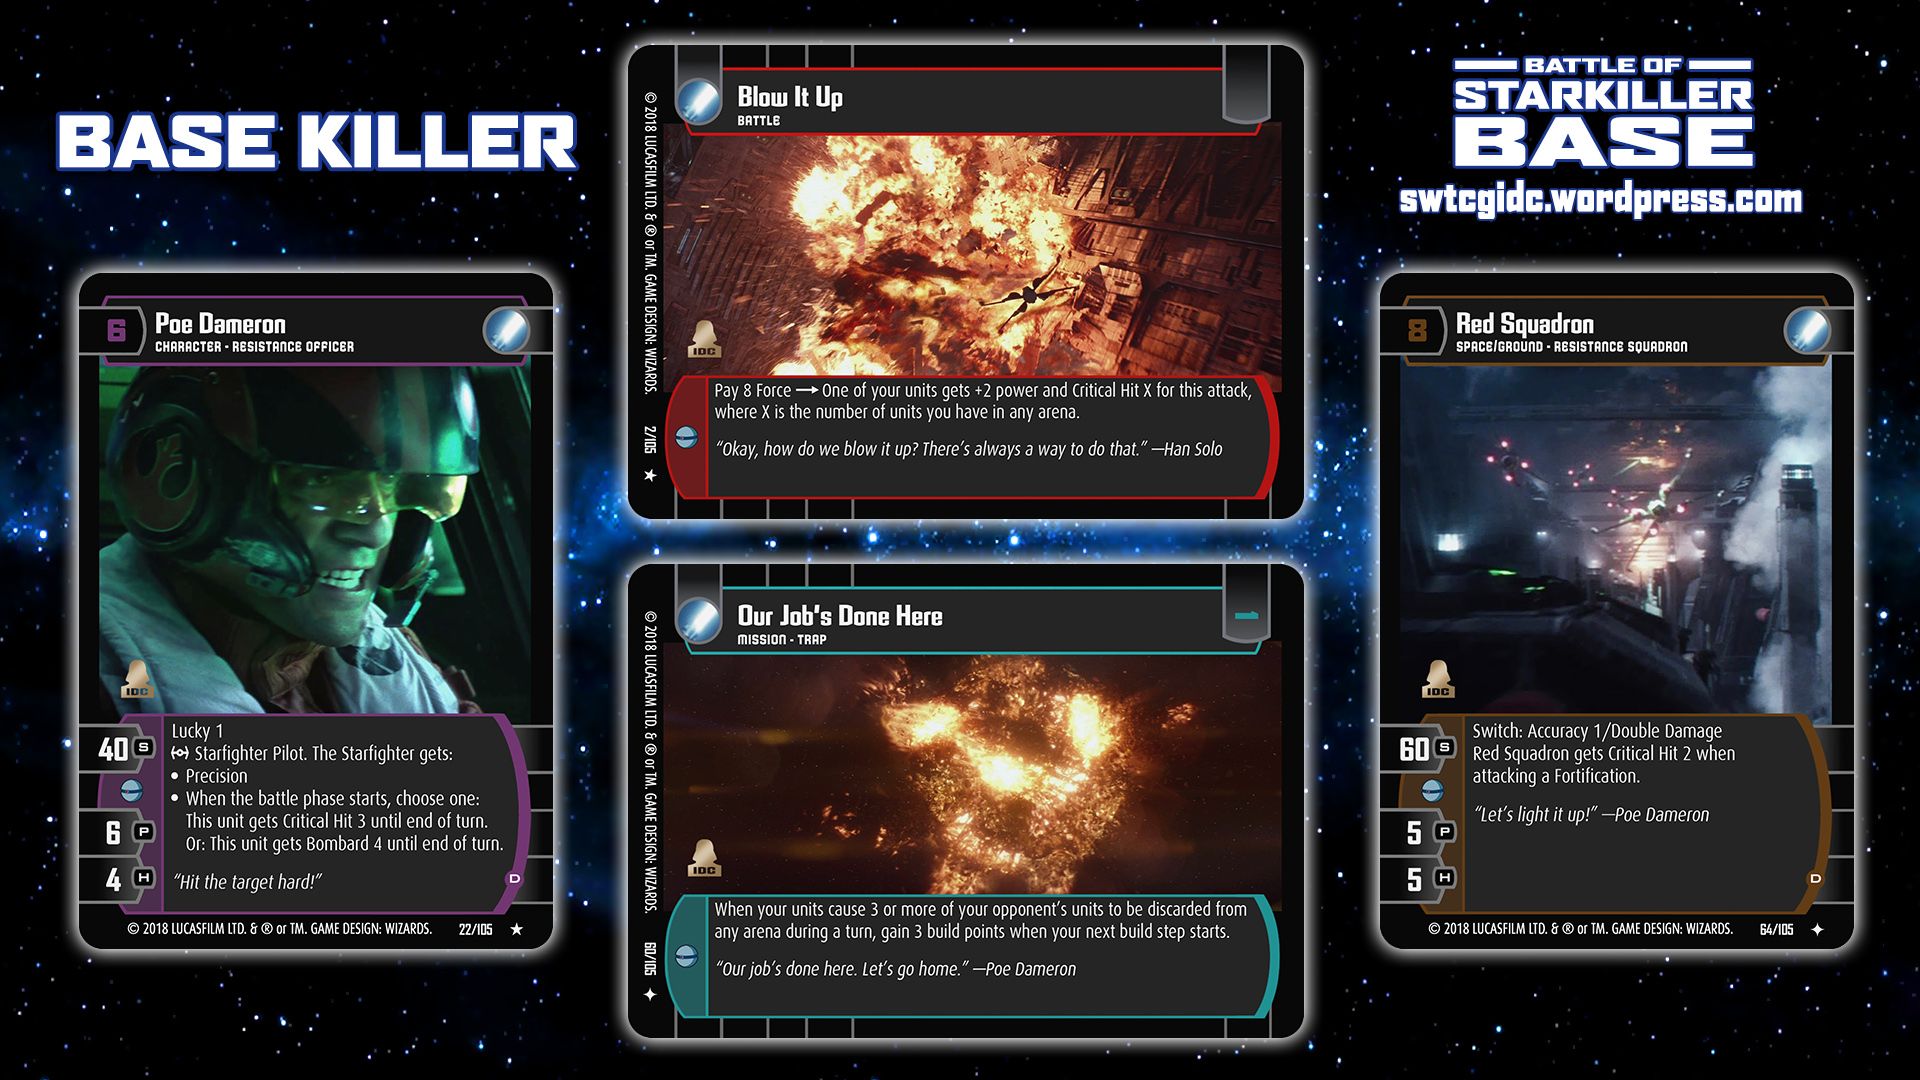 Battle of Starkiller Base. Star Wars Trading Card Game: Independent Development Committee